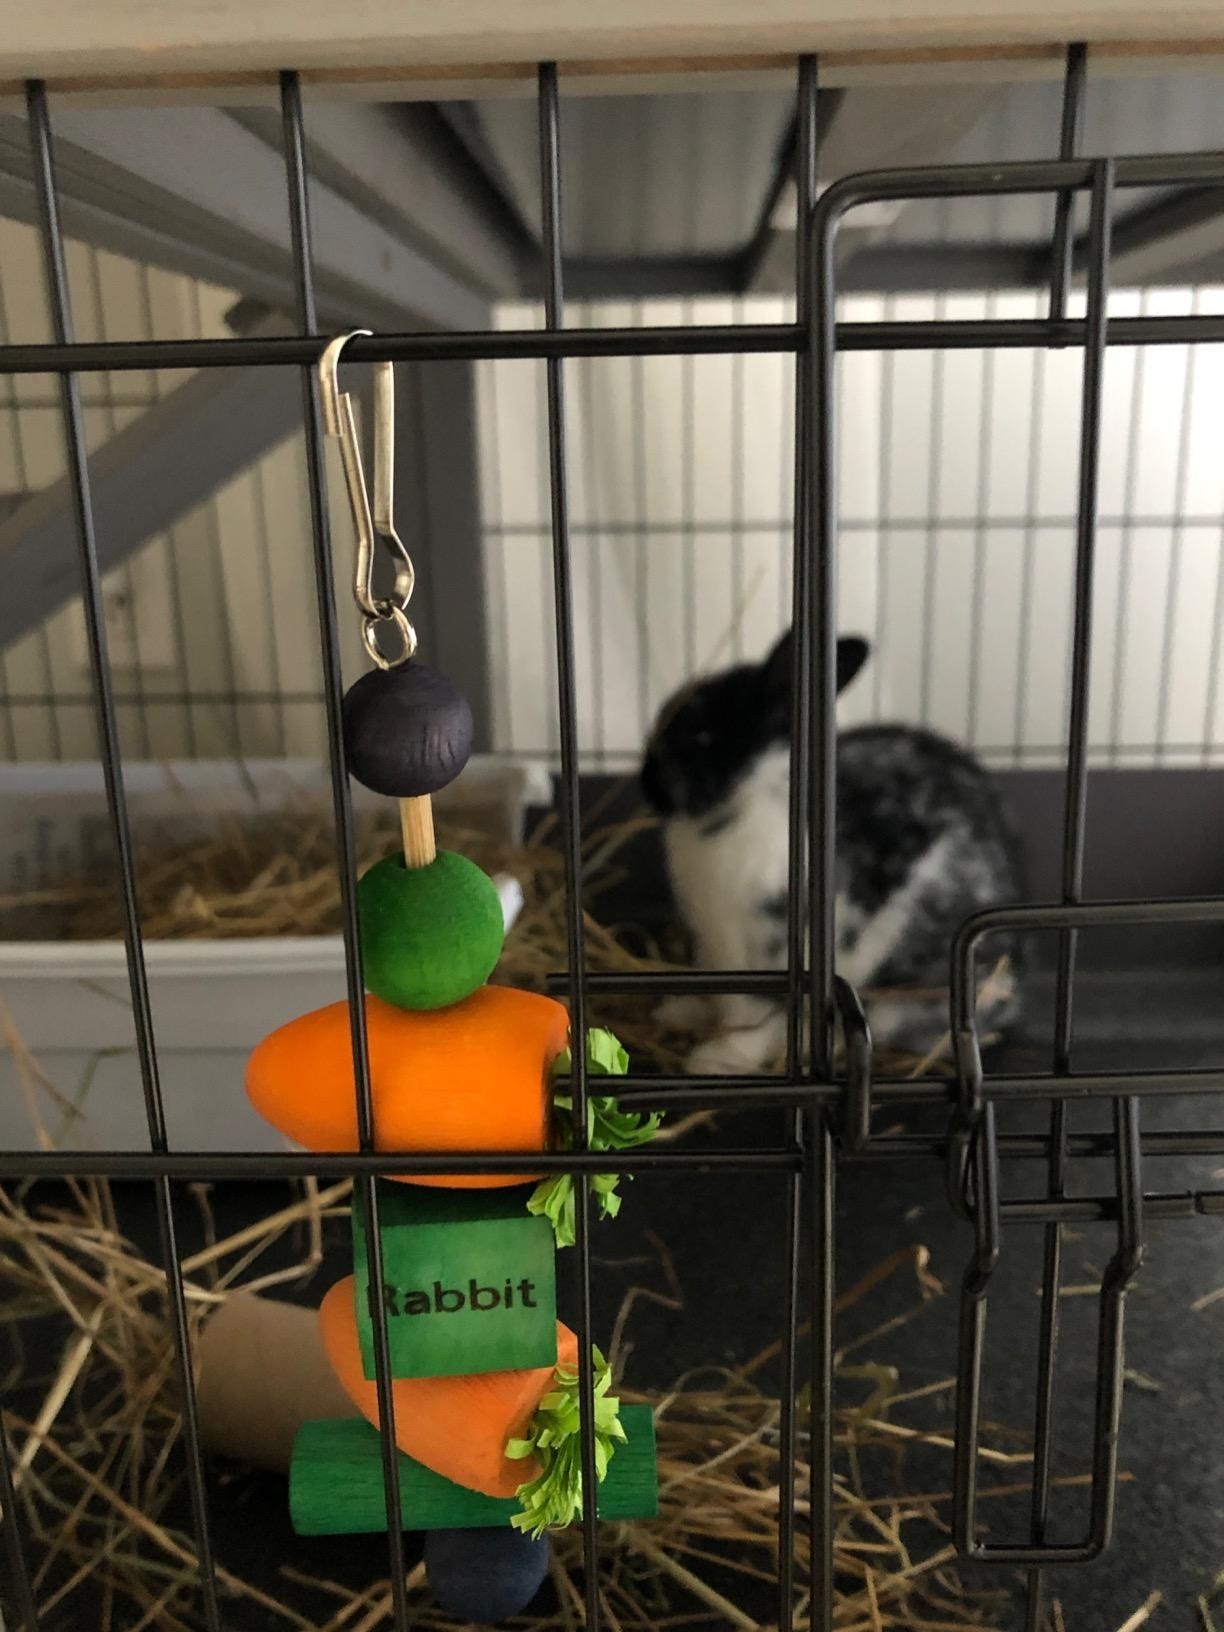 The toy hanging inside a rabbit cage